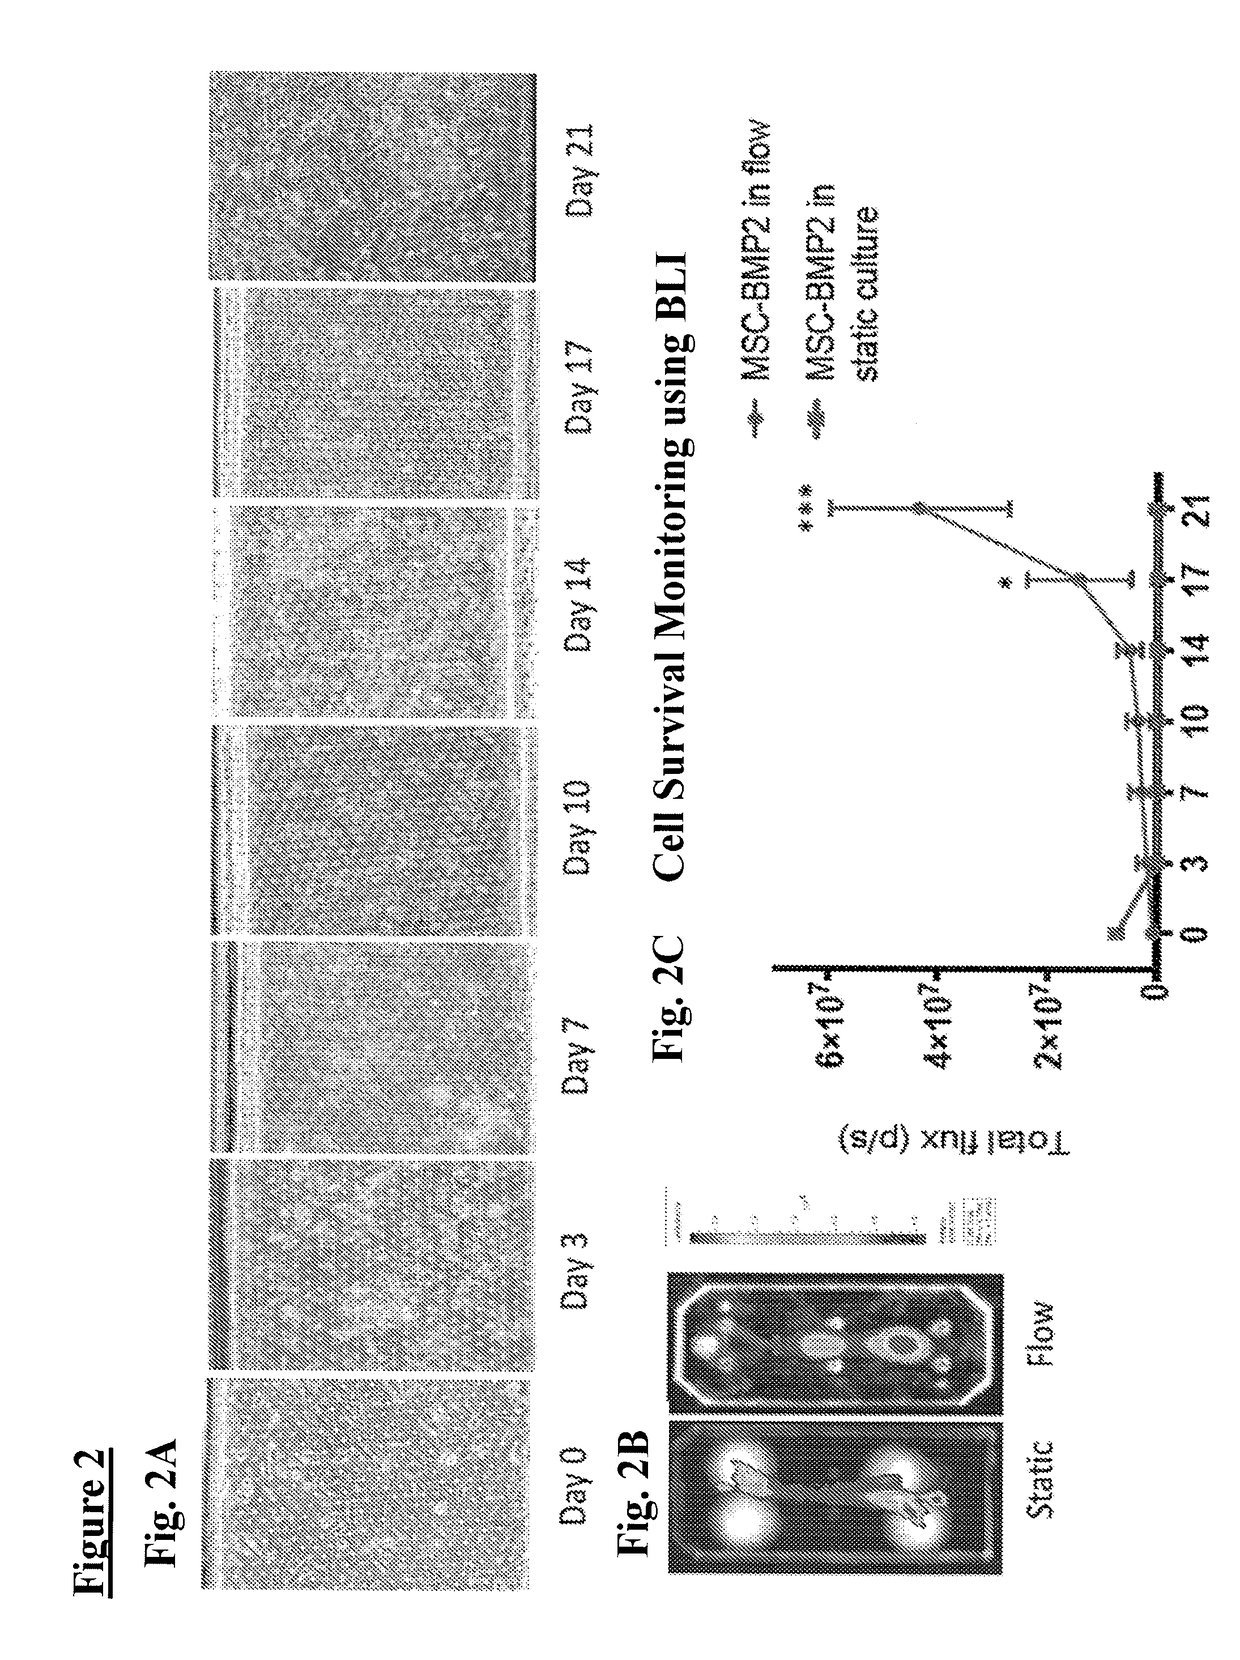 Method of osteogenic differentiation  in microfluidic tissue culture systems